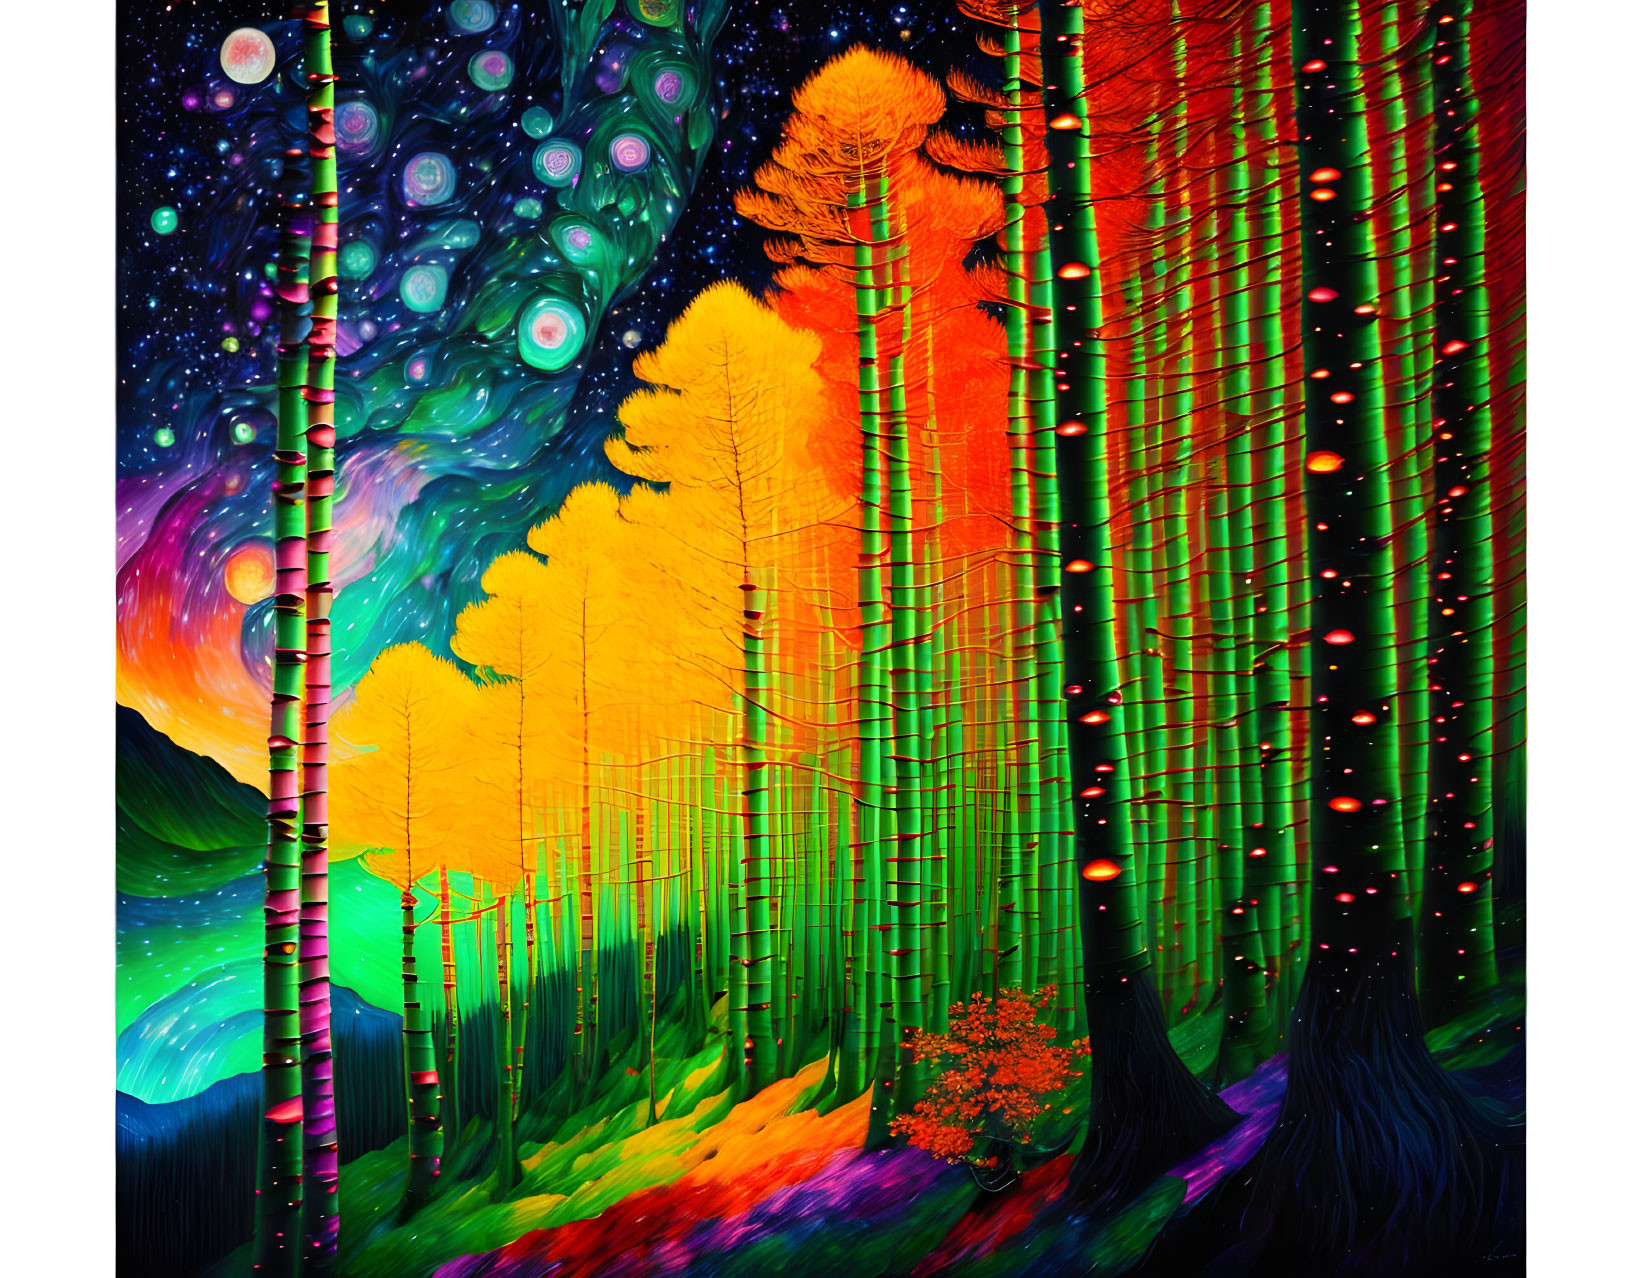 Surreal colorful forest with glowing trees & starry sky